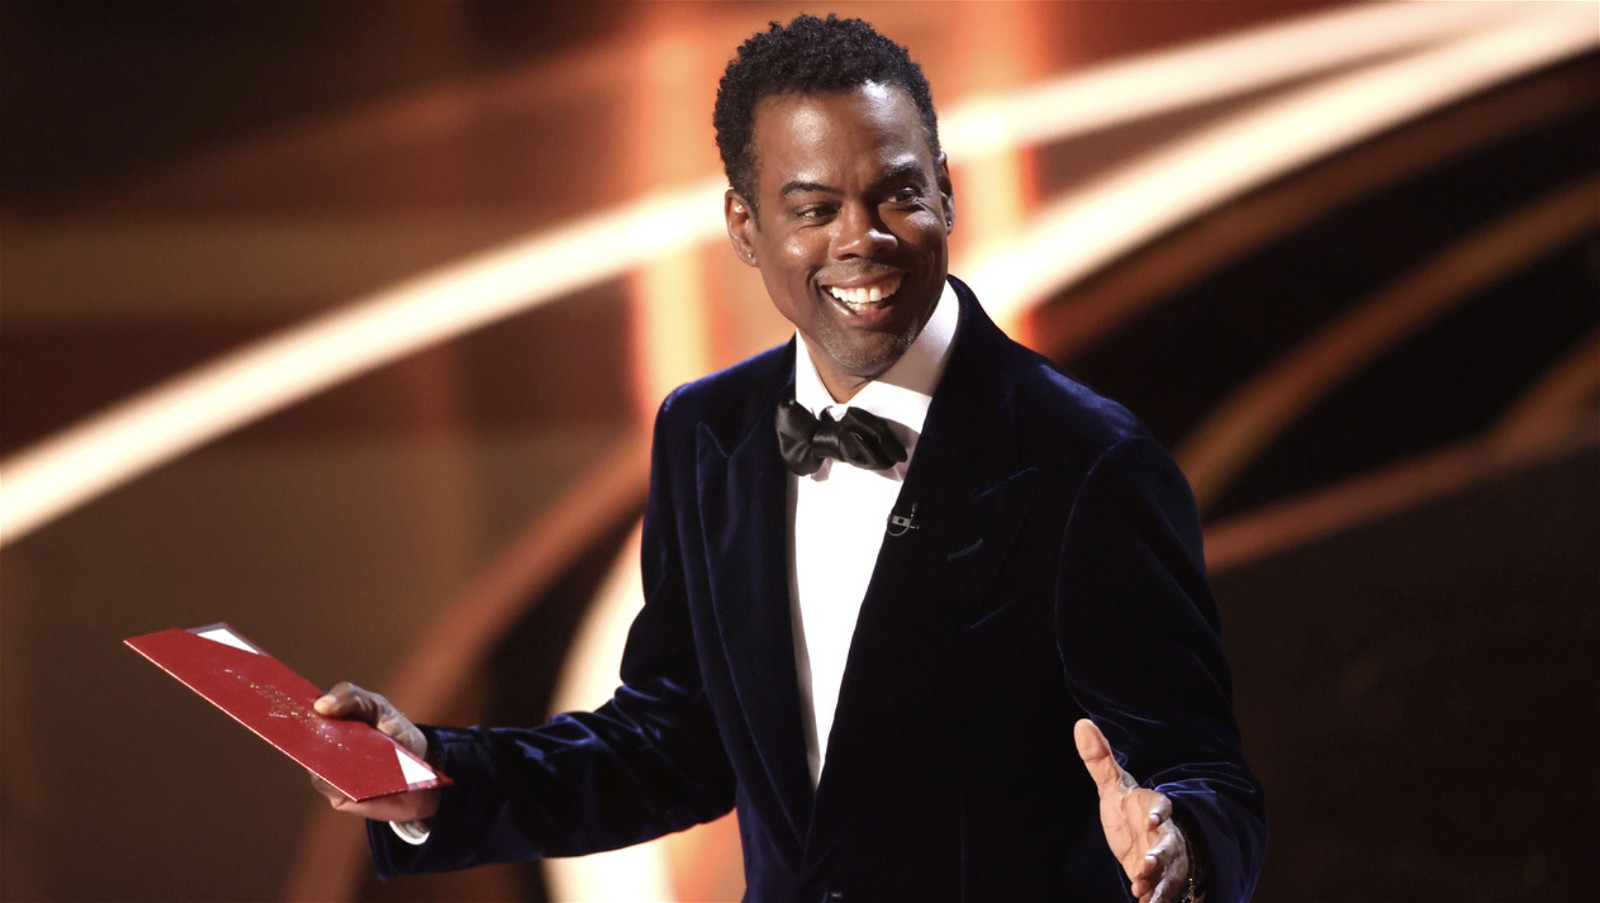 Chris Rock at the 2022 Oscars Selective Outrage